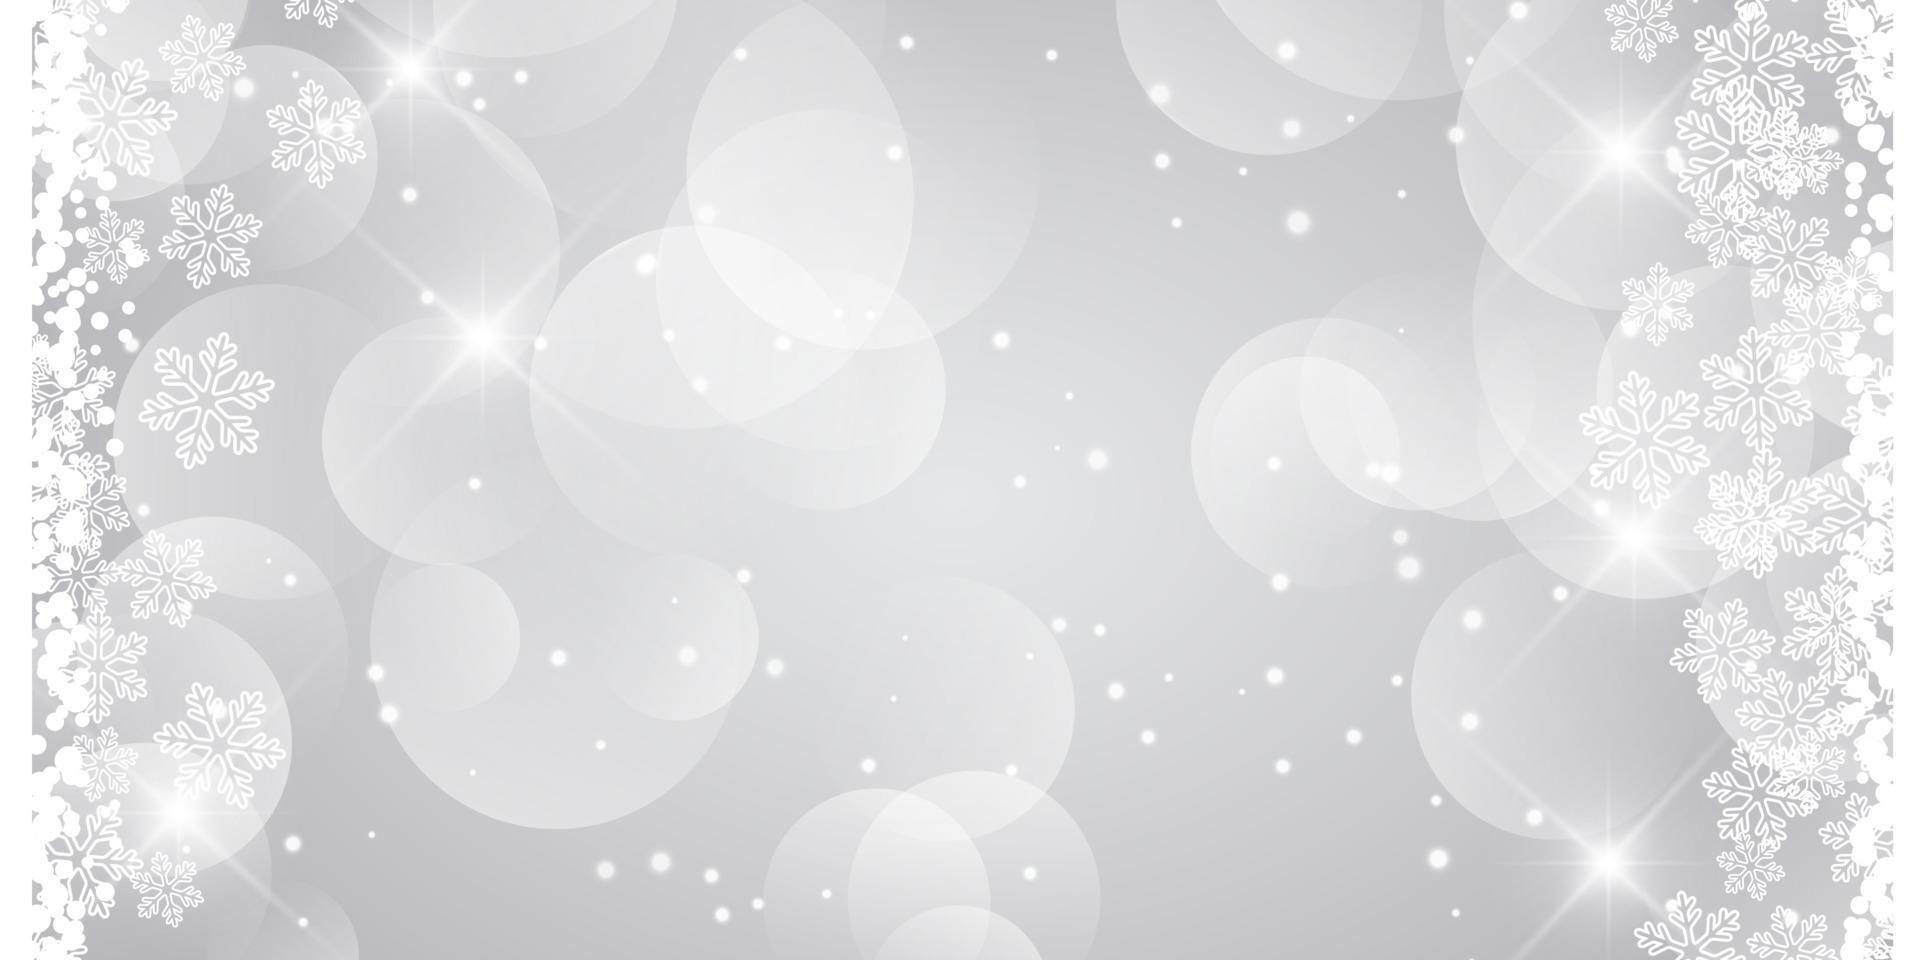 silver christmas banner design with snowflakes vector